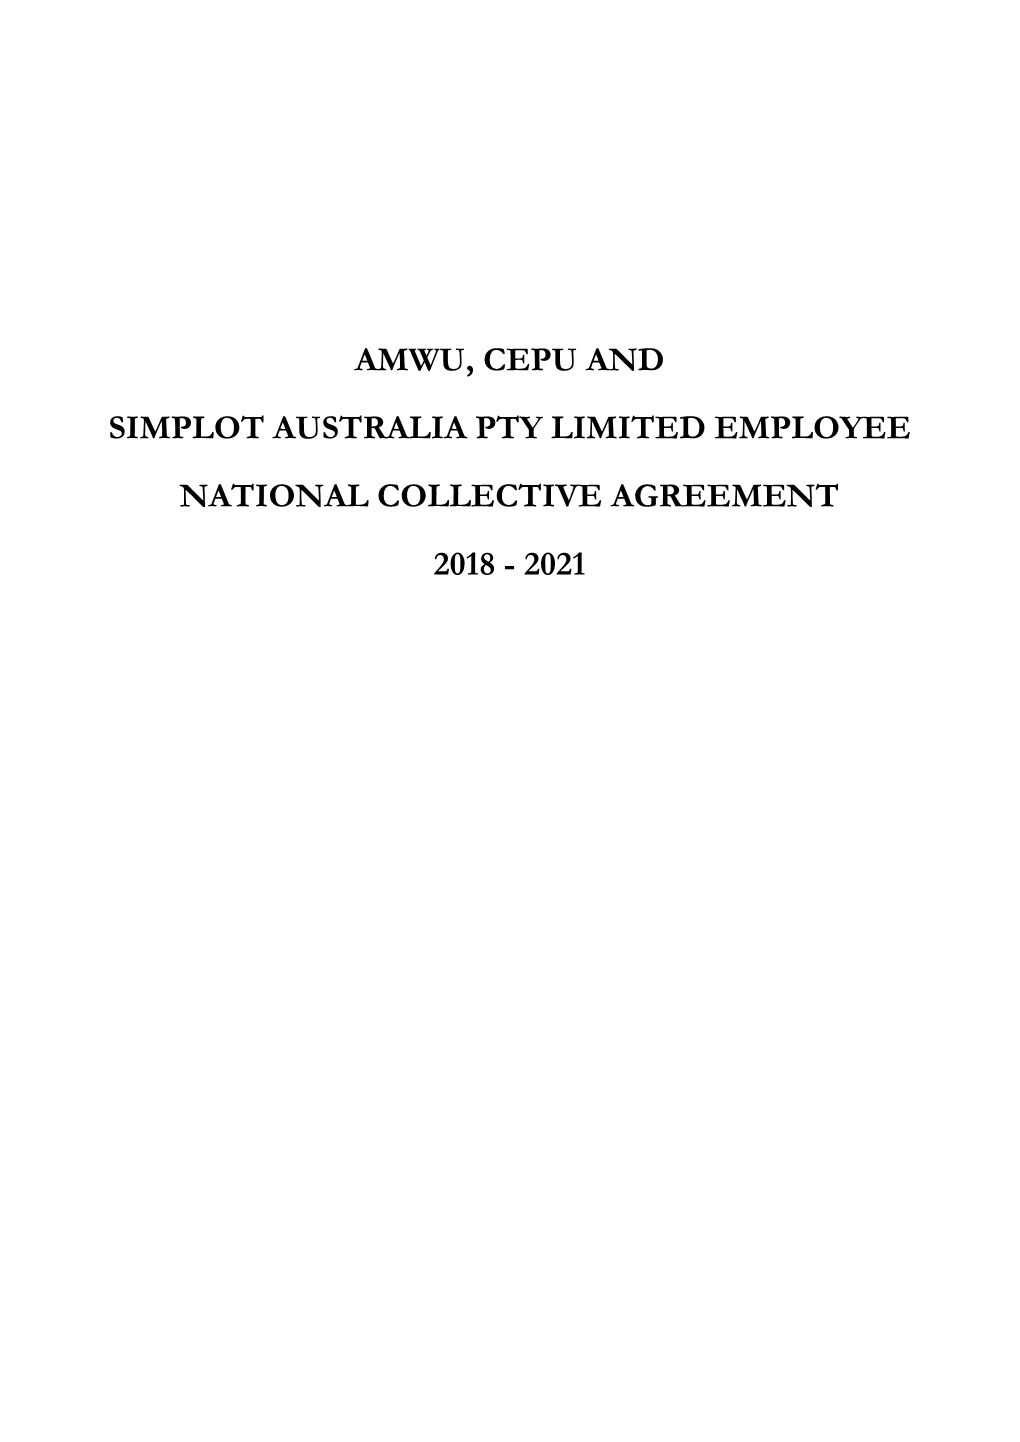 Amwu, Cepu and Simplot Australia Pty Limited Employee National Collective Agreement 2018 - 2021